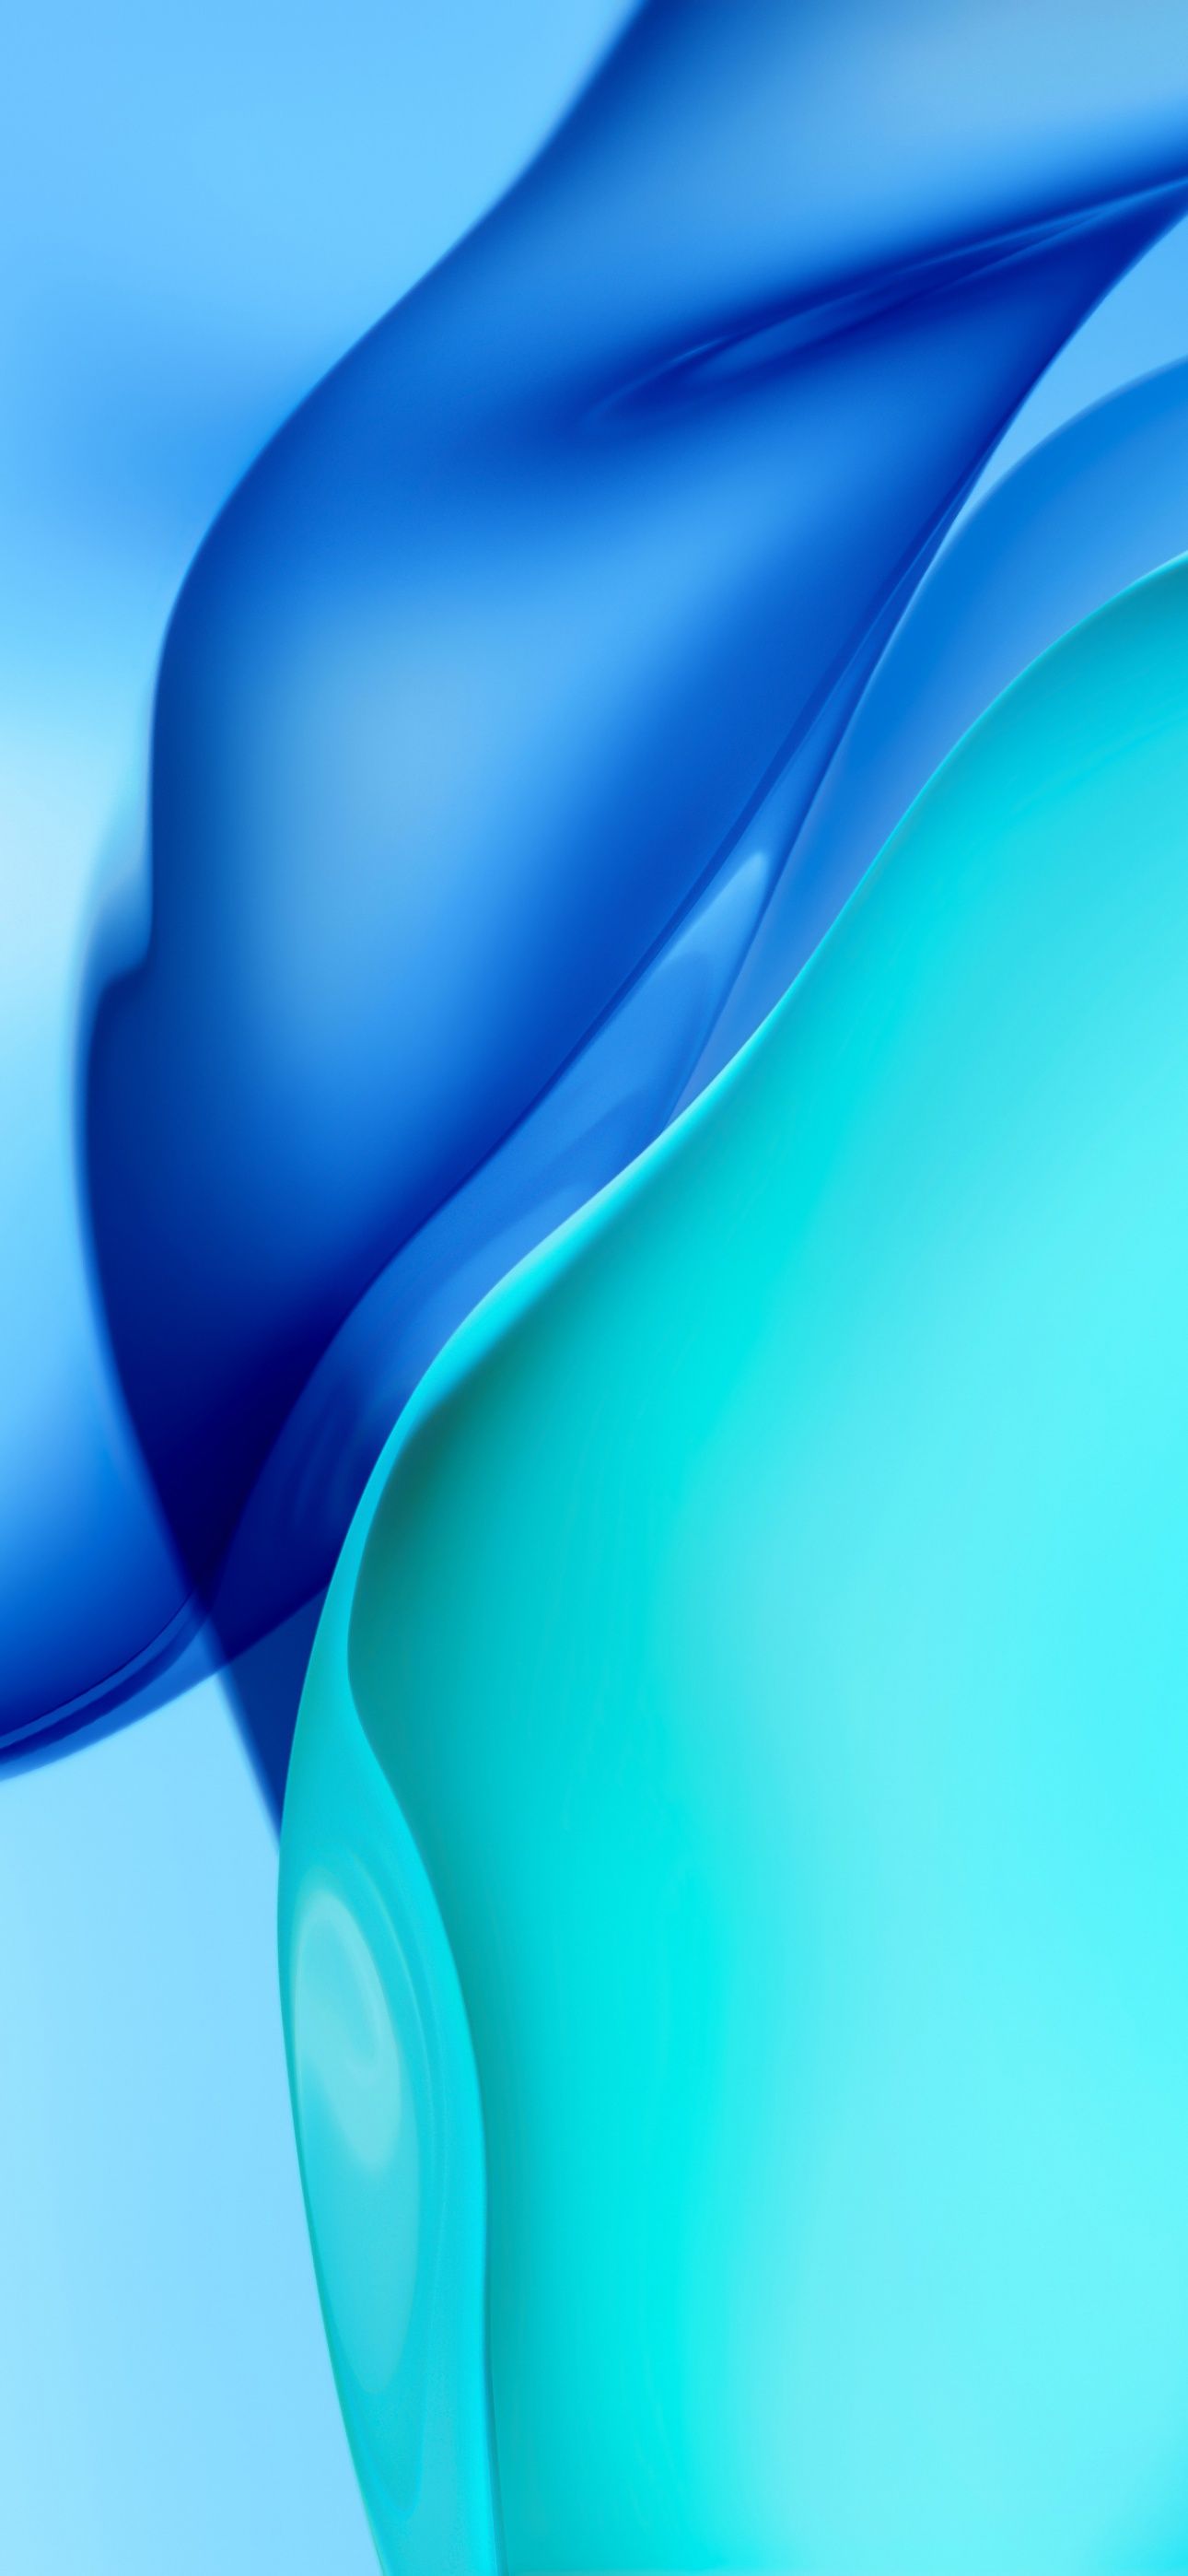 A blue and green abstract background - Teal